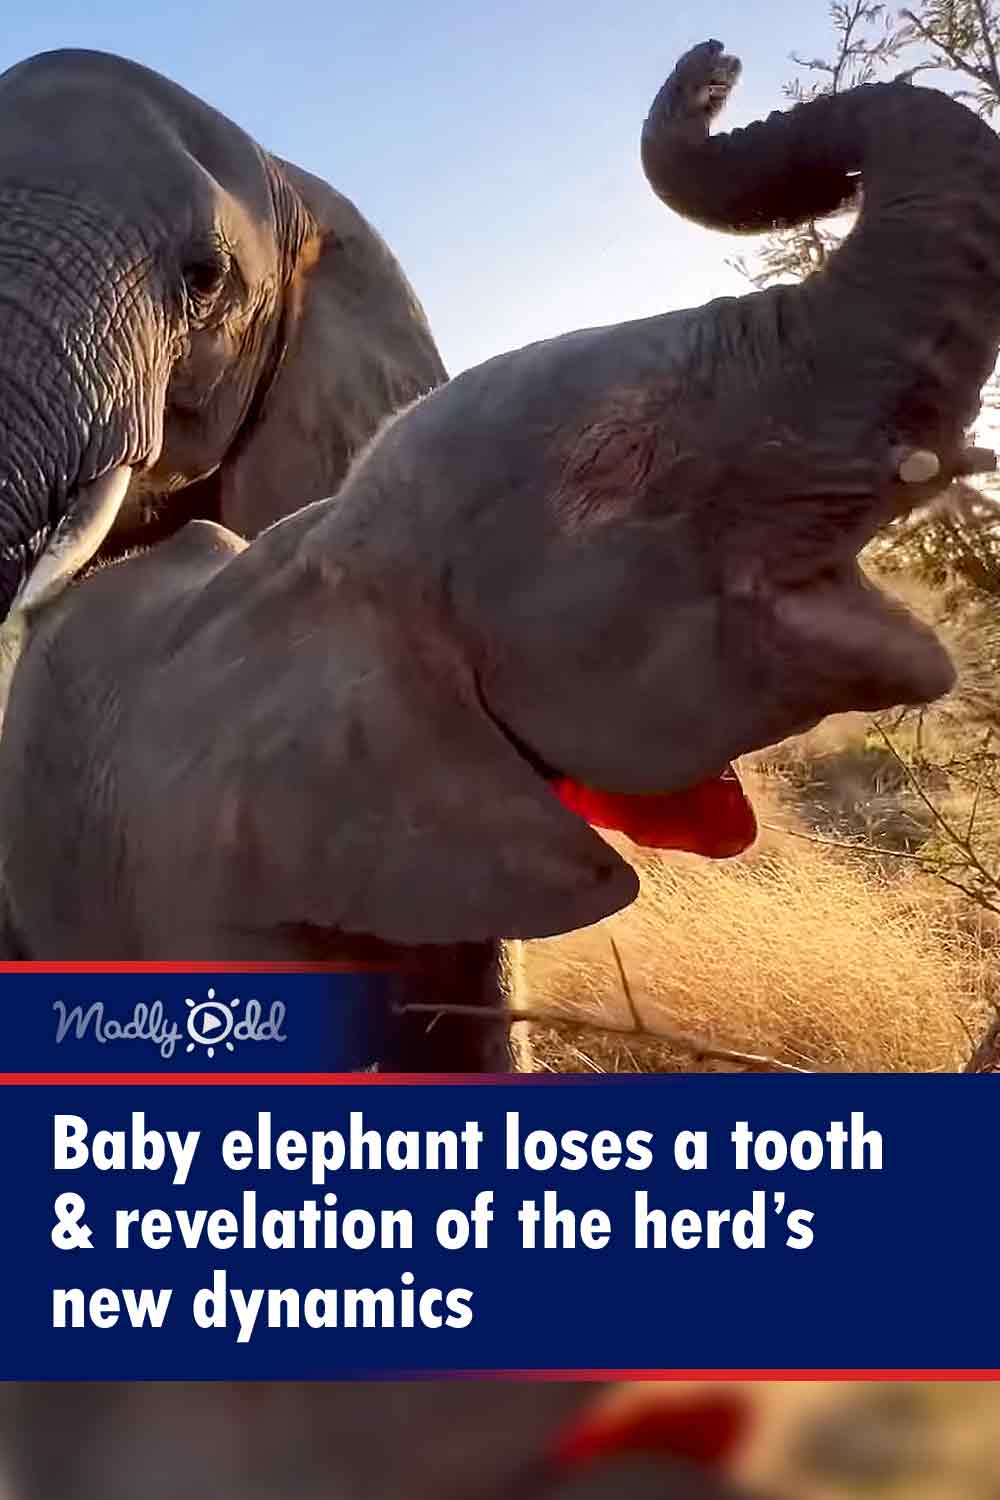 Baby elephant loses a tooth & revelation of the herd’s new dynamics